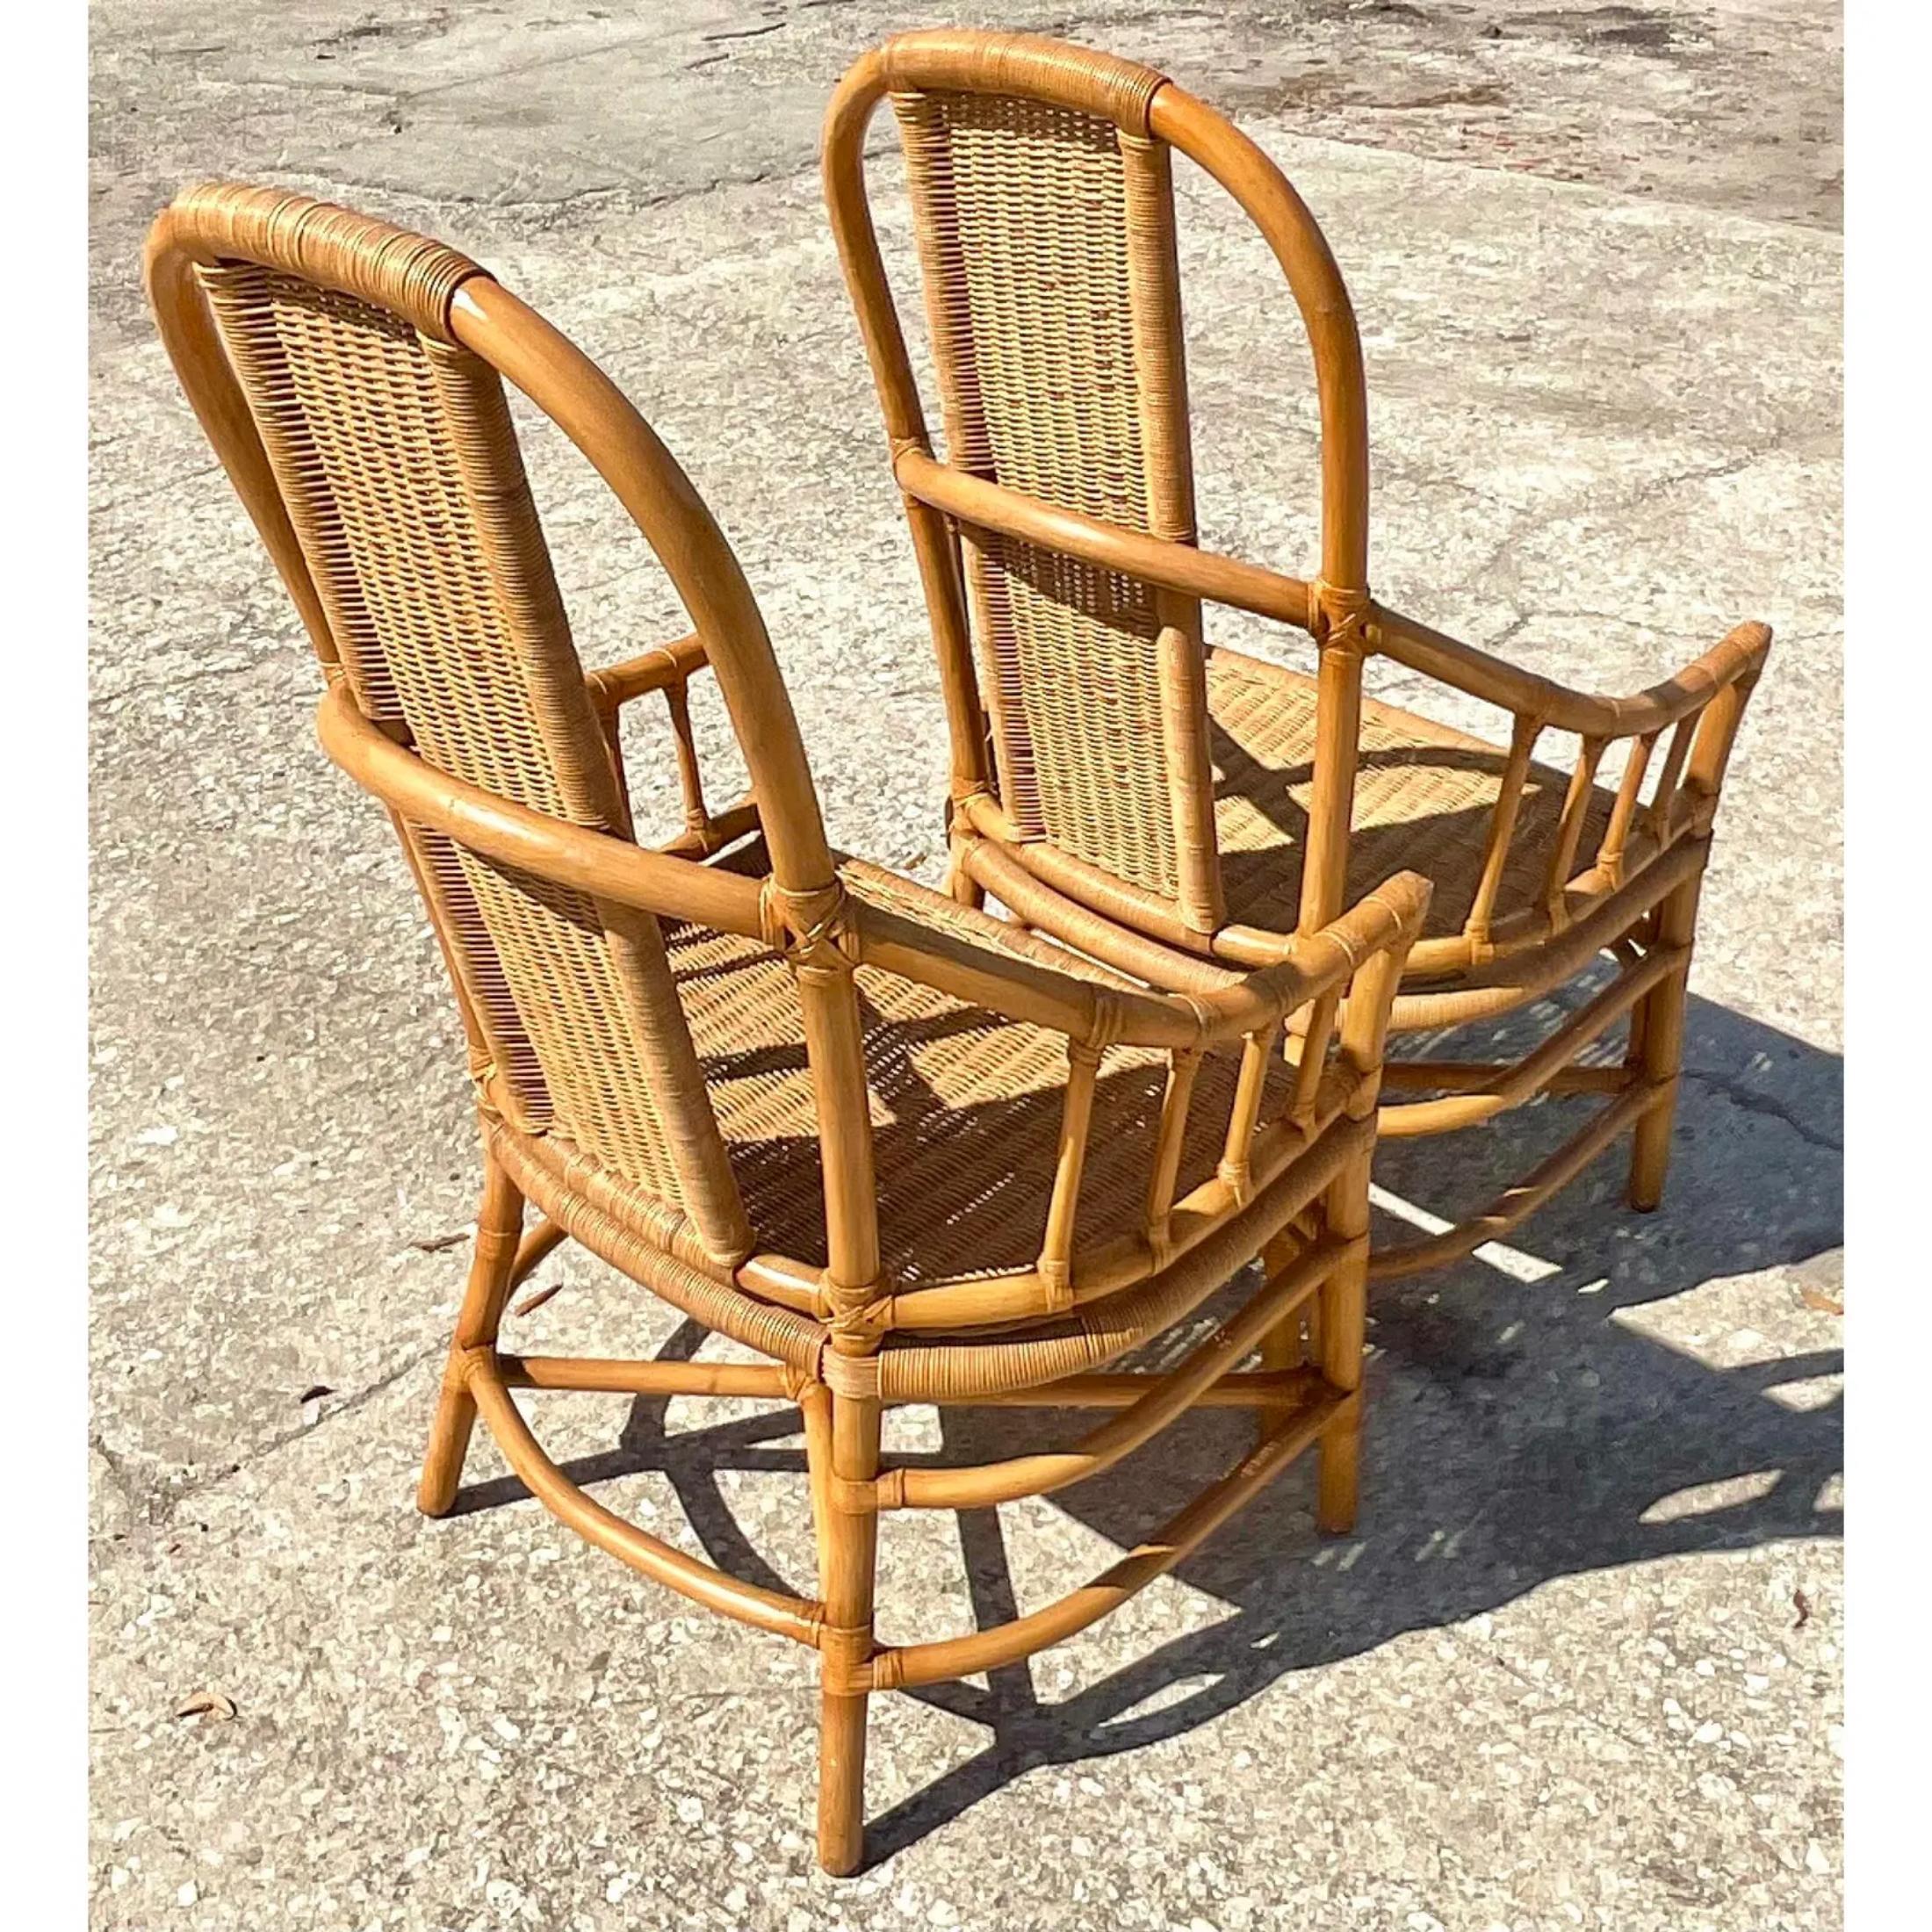 Vintage Coastal Mark David Woven Rattan Dining Chairs - Set of 4 For Sale 1